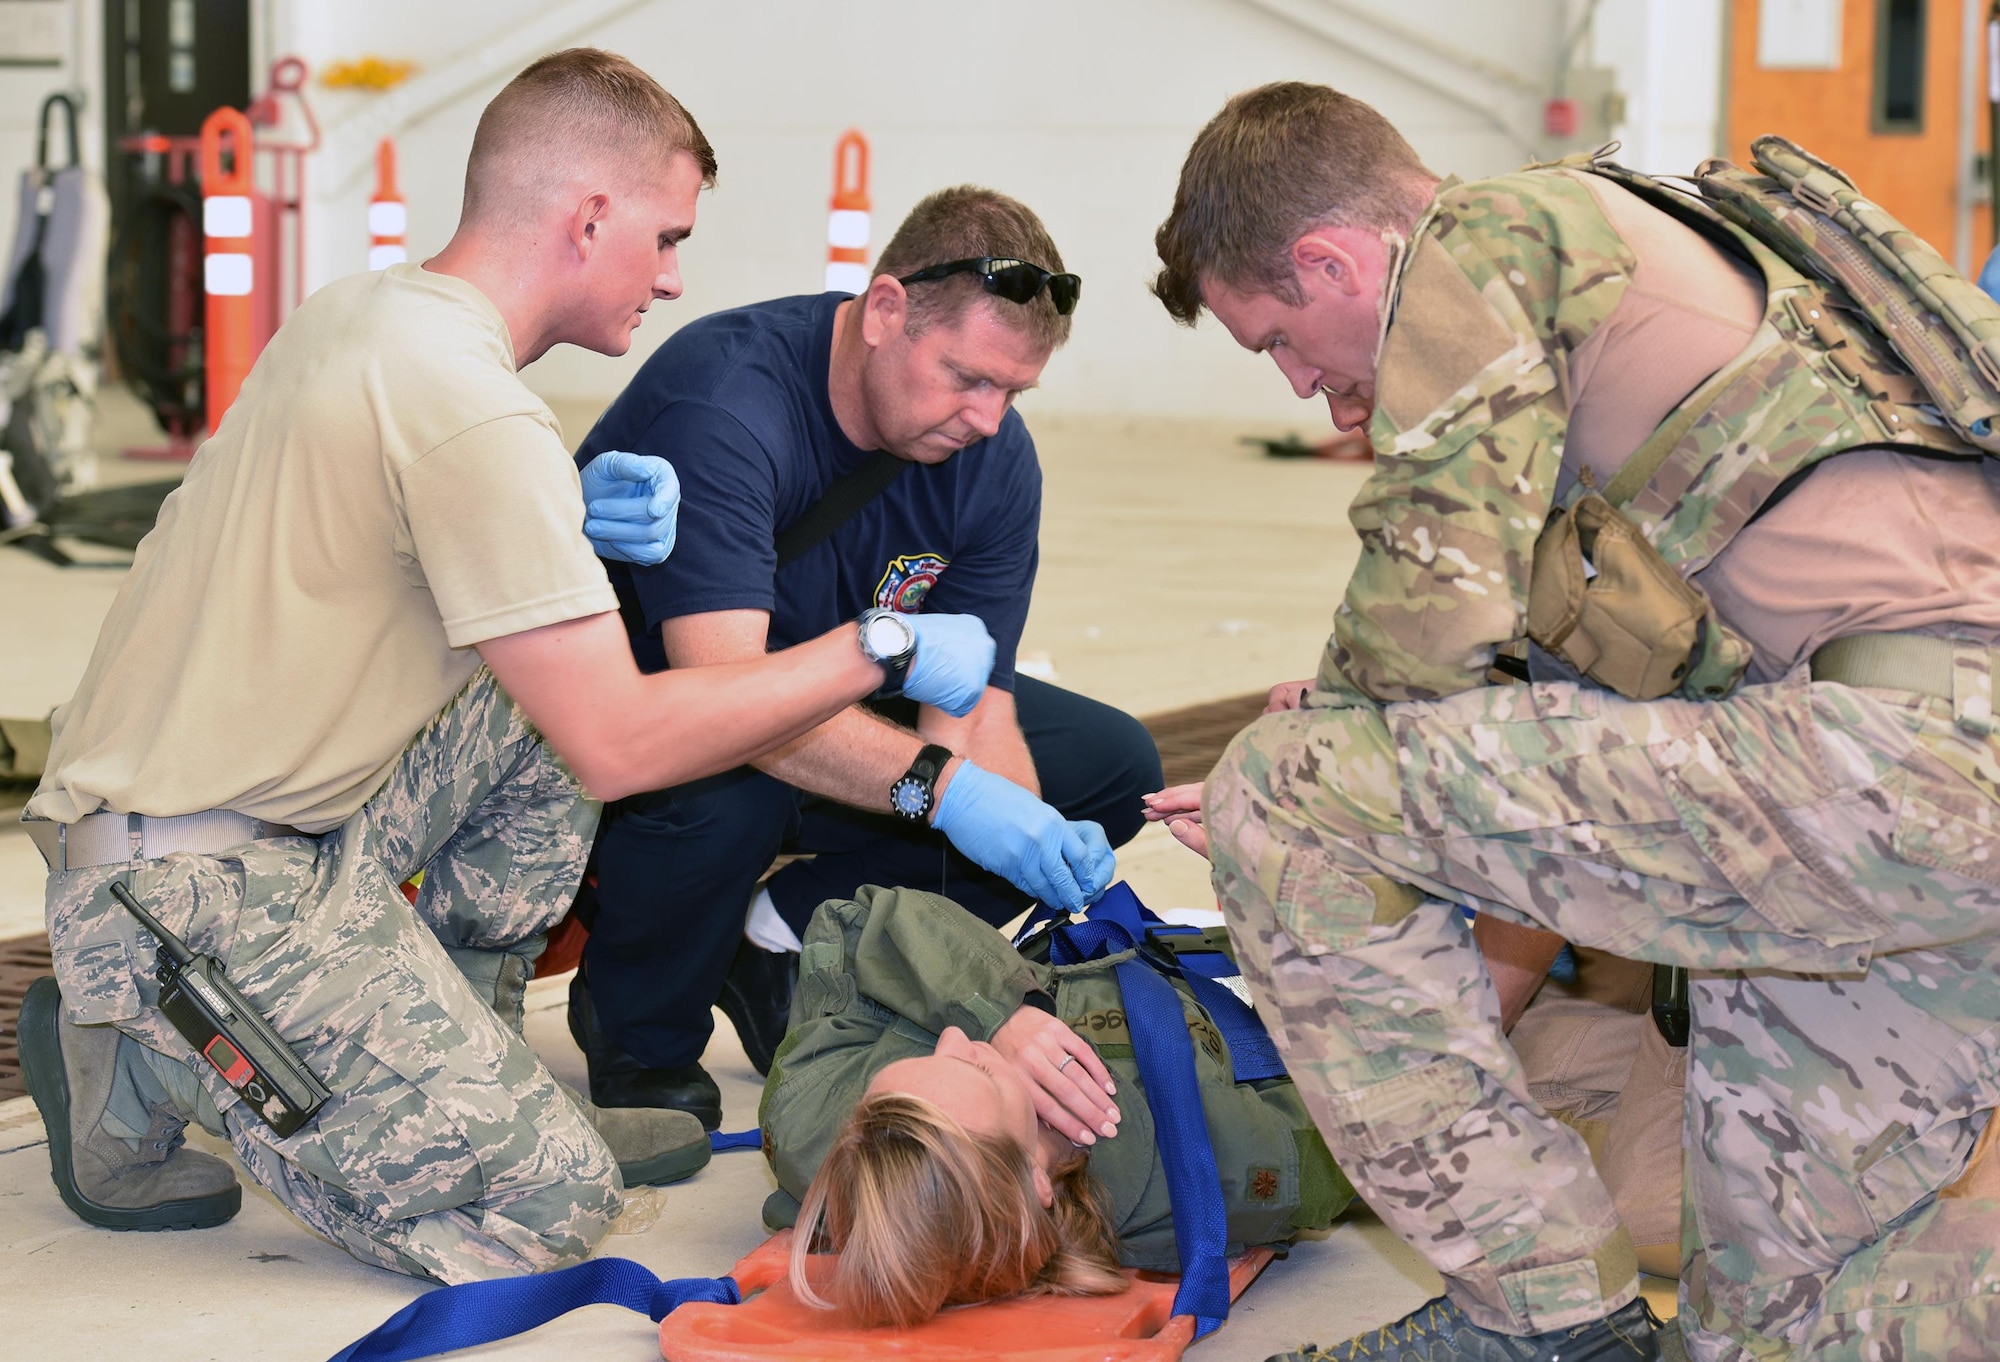 Airman 1st Class Brian Mclain, left, and Gene Carlander, middle, 45th Civil Engineer Squadron firefighters, secure active shooter exercise victim Senior Airman Kristina Kruger, 920th Force Support Squadron, onto a stretcher for transport to the hospital while 1st Lt. Ryan Kelly, right, 38th Rescue Squadron combat rescue officer, annotates her status update July 25, 2017 in Hangar 750. The firefighter and pararescue teams worked together closely to tend to victims on scene. The joint exercise between the 920th Rescue Wing and 45th Space Wing tested the units’ ability to work together in an emergency situation. (U.S. Air Force photo/Tech. Sgt. Lindsey Maurice)